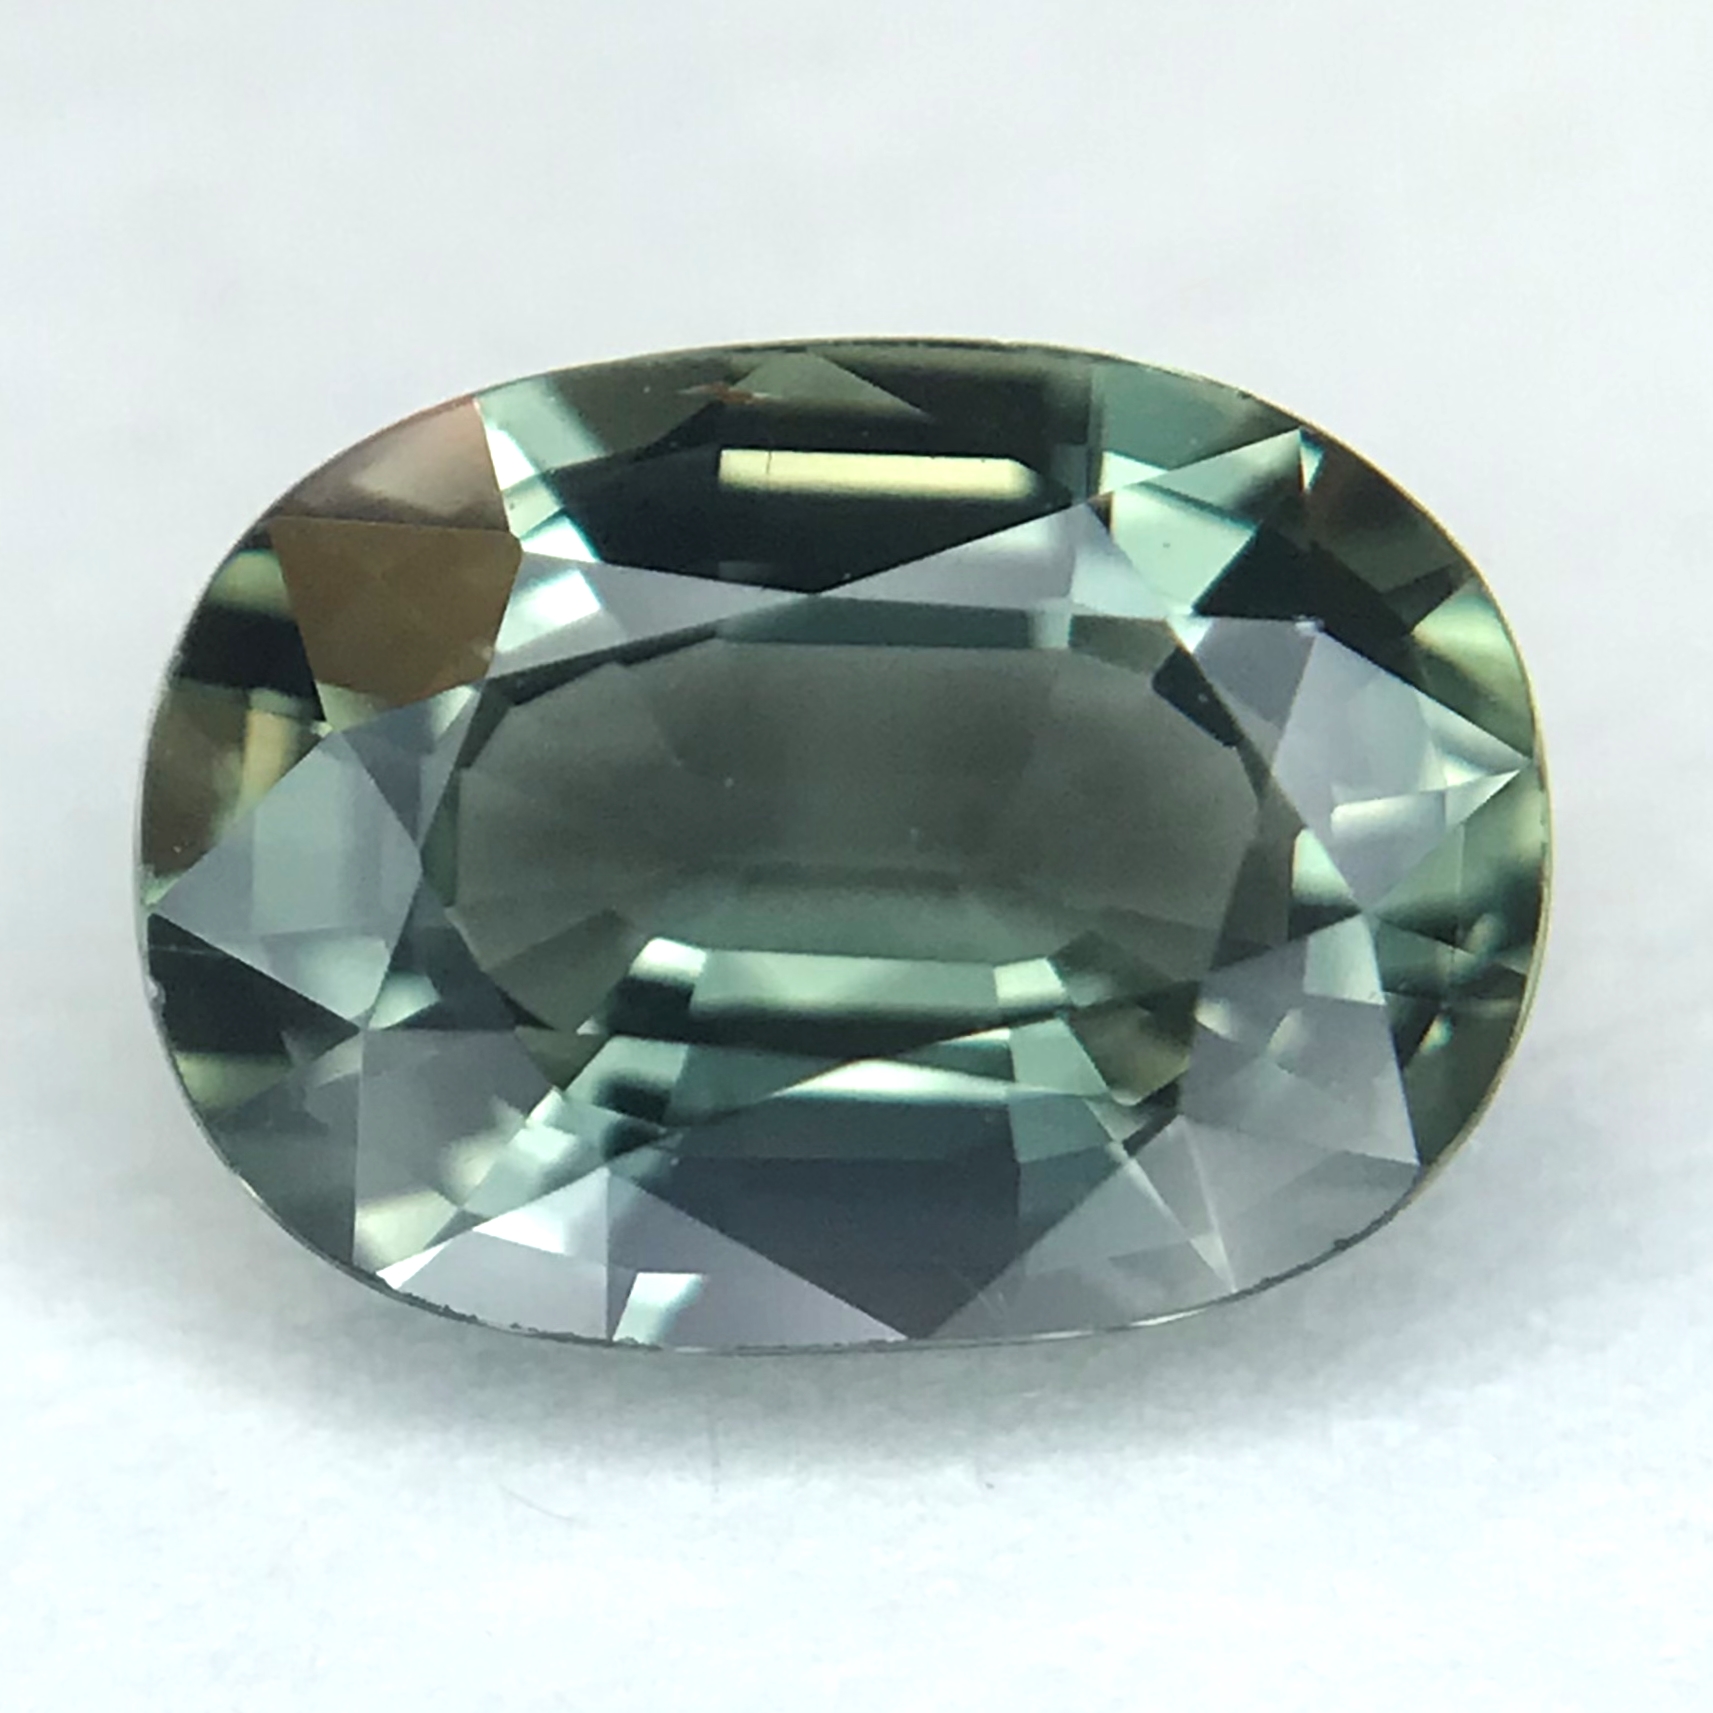 1.06ct Oval Mixed Cut Sapphire